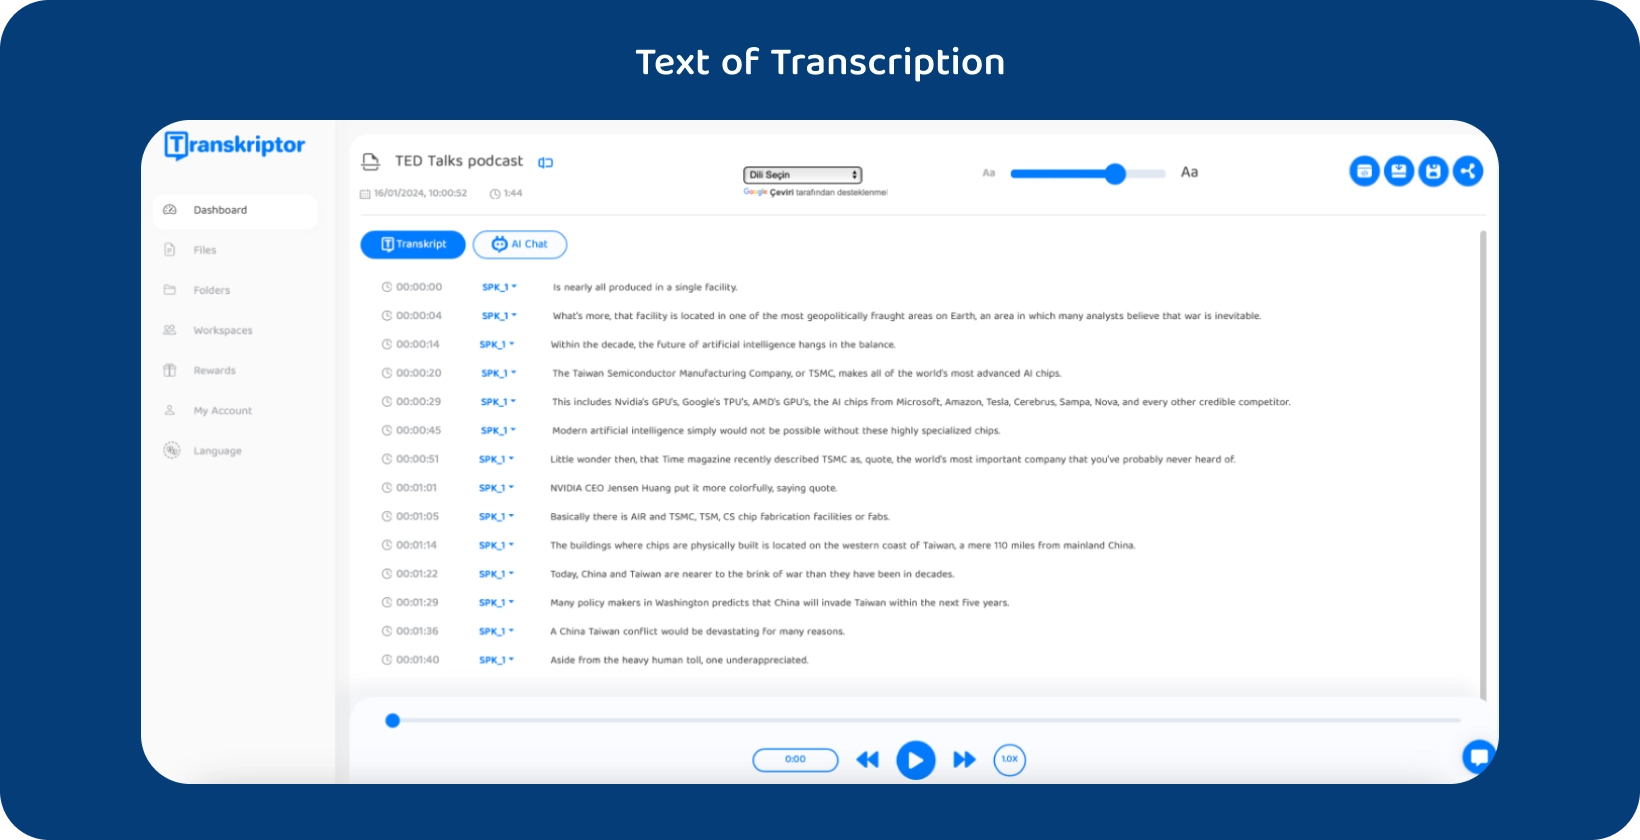 Transkriptor software interface displaying a transcribed TED Talks podcast.